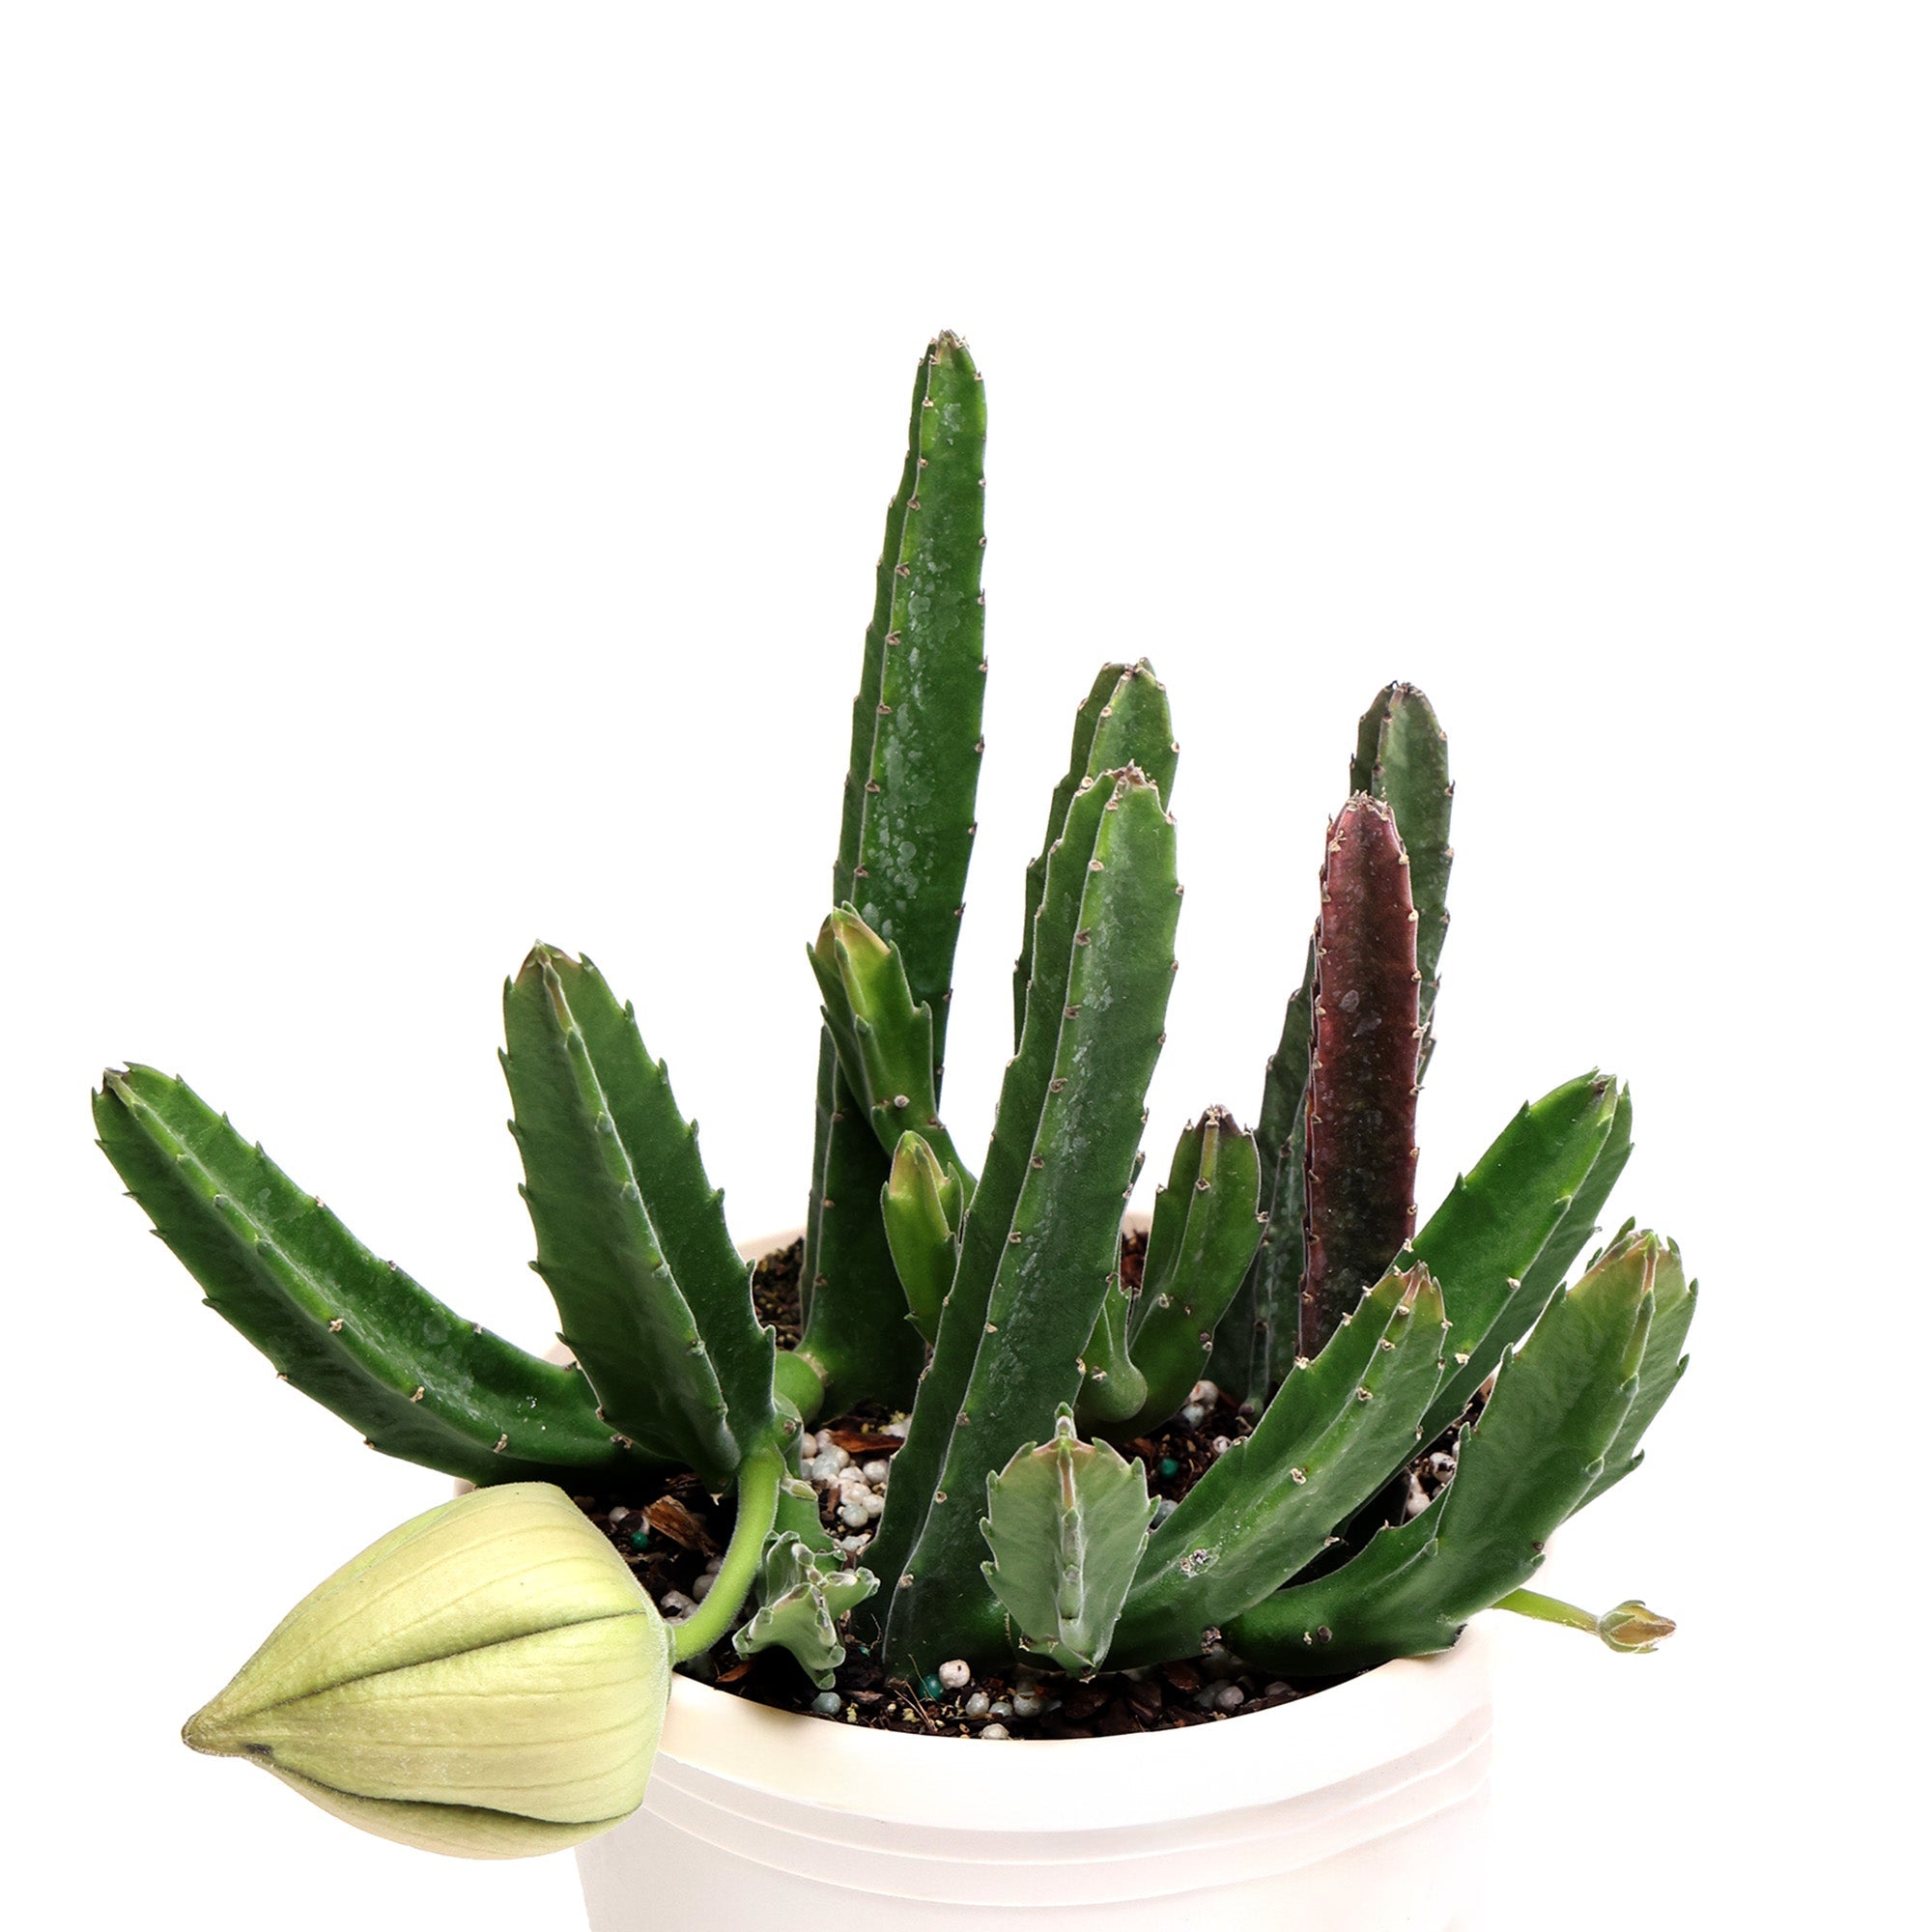 A green Stapelia Hirsuta 6 Inches plant with emerging flower buds, housed in a simple white pot by Chive Studio, isolated on a white background.